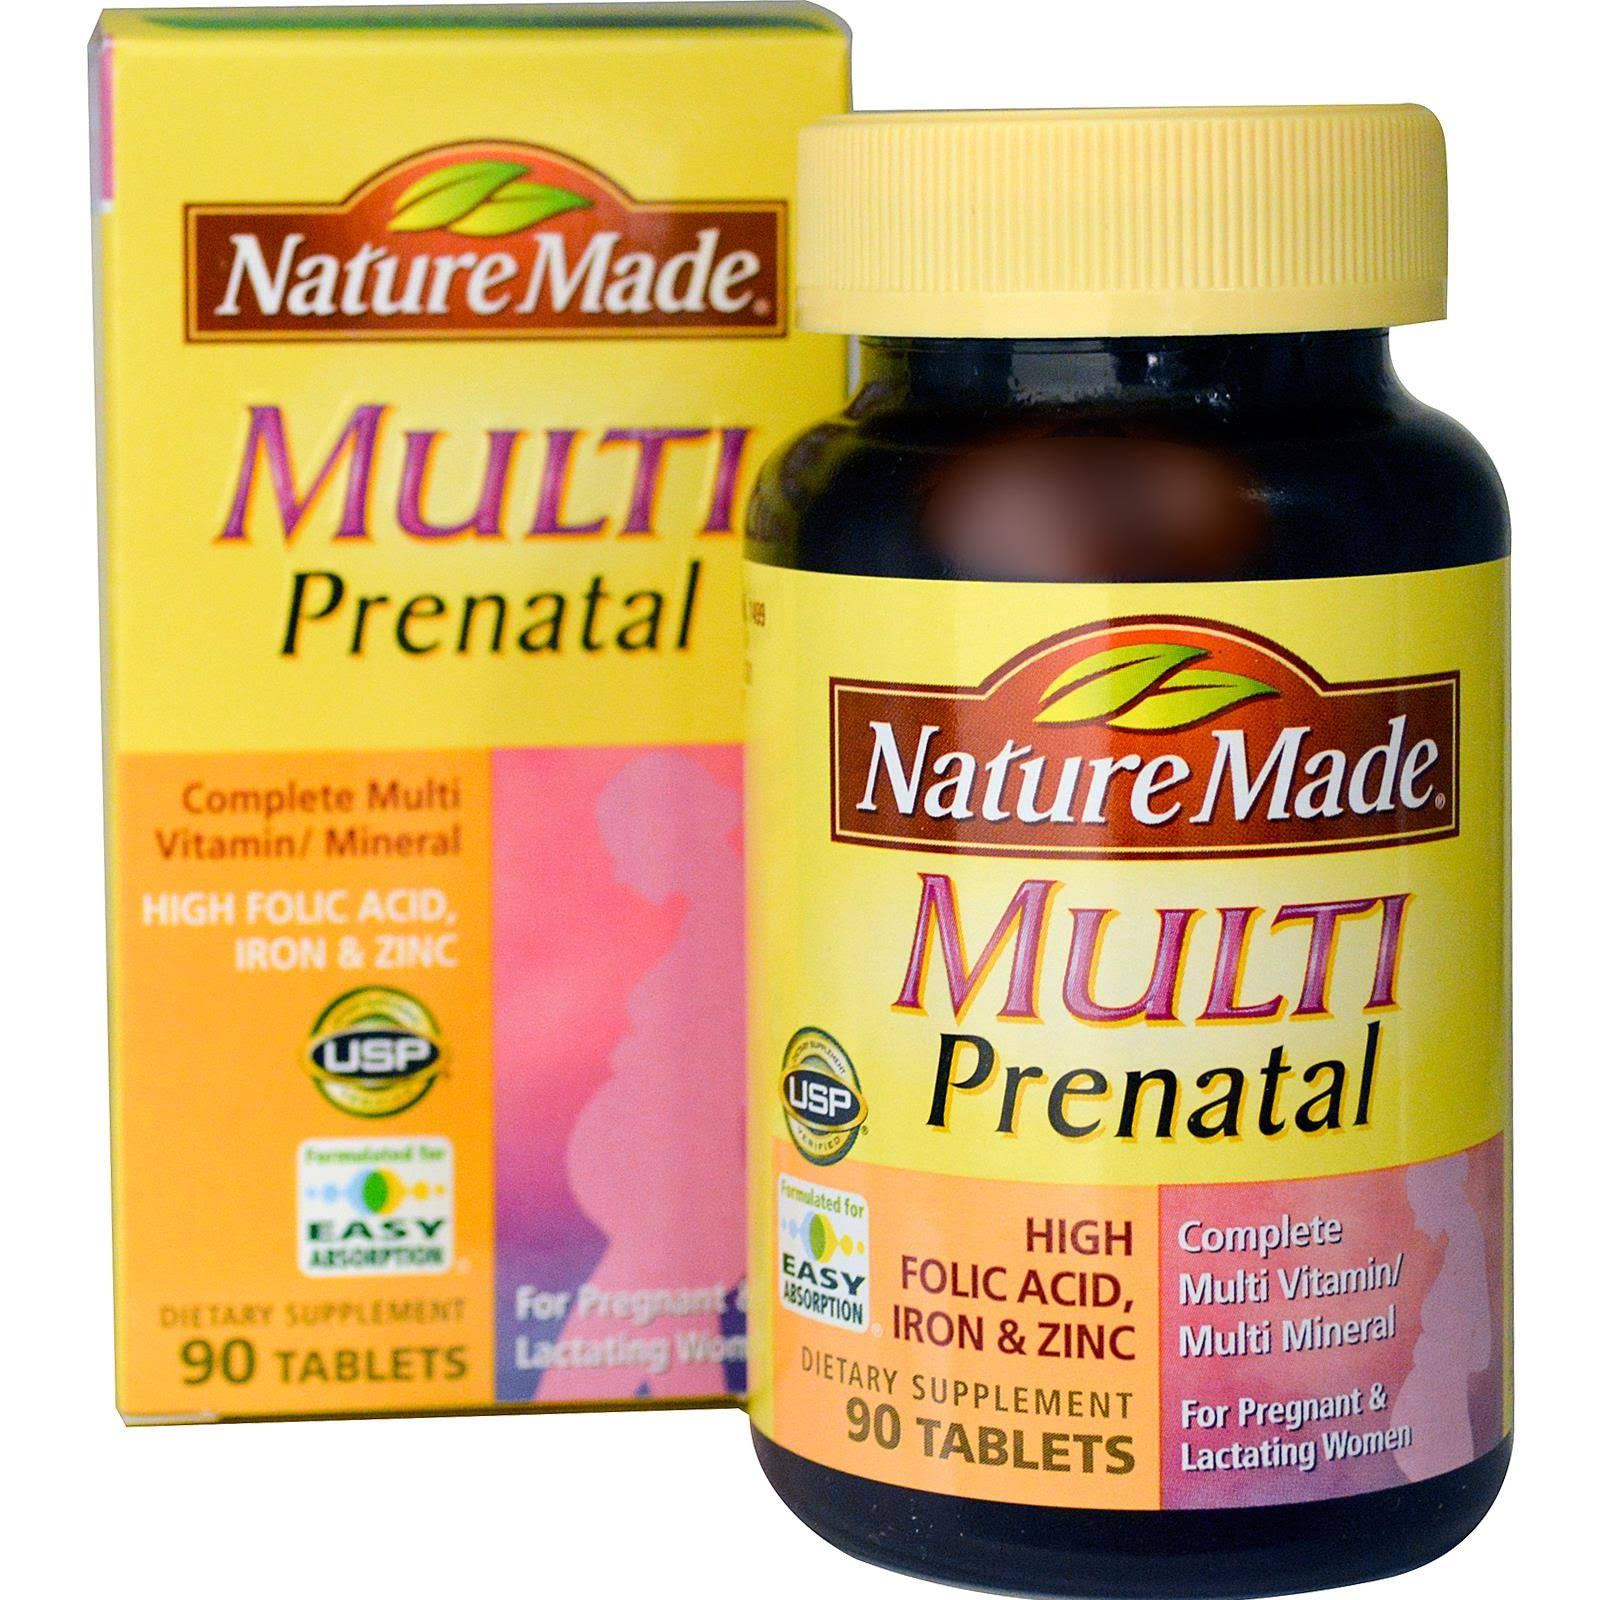 Nature Made Multi Prenatal Dietary Supplement - 90 Tablets